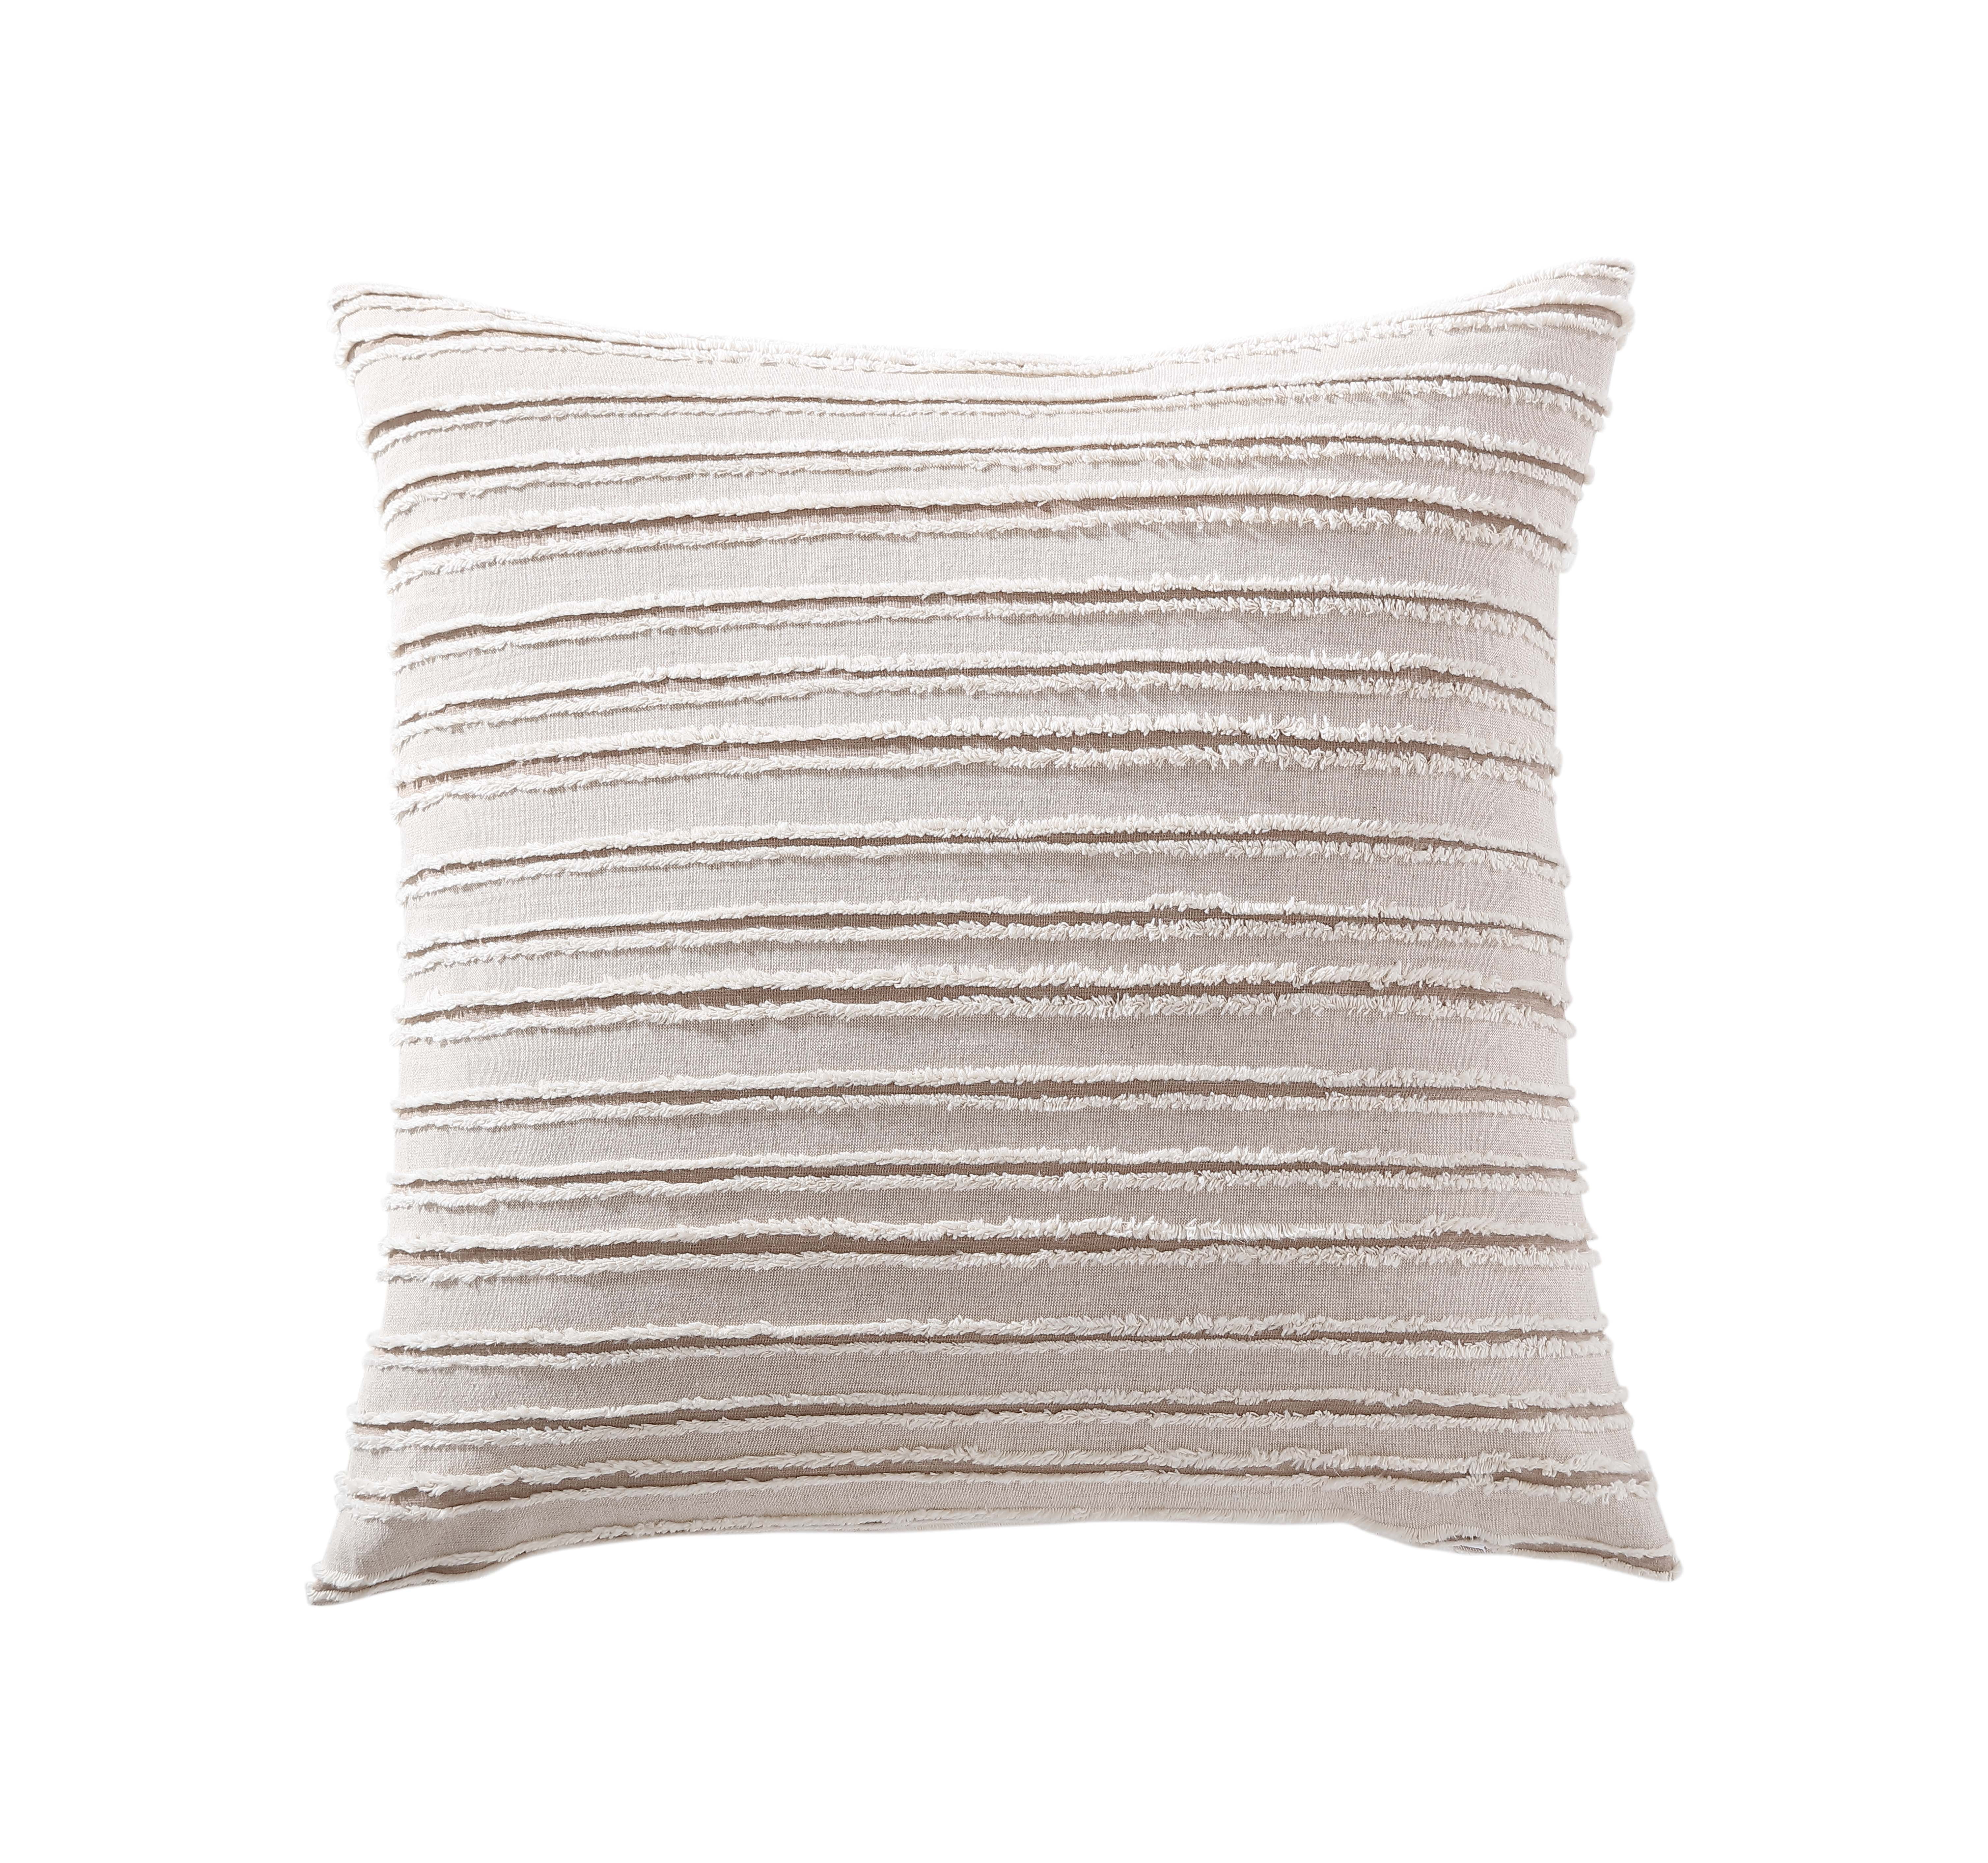 Tensira Small Lumbar Pillow in Blue Double Stripe – Collyer's Mansion